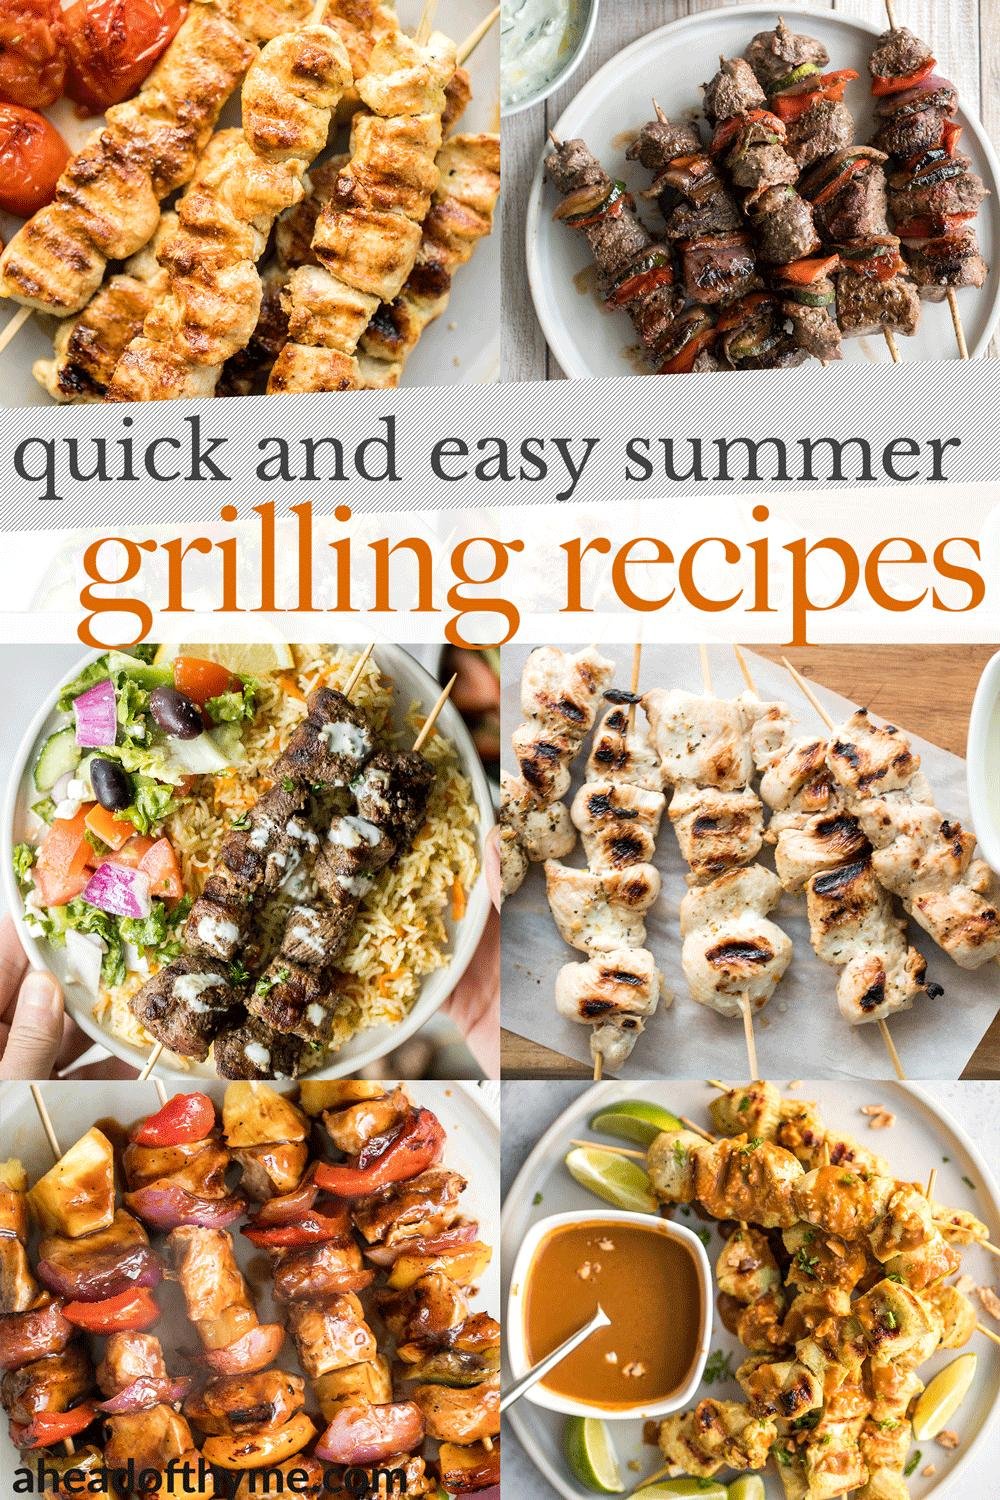 10 Mouth-Watering Summer Grilling Recipes to Impress Your Friends and Family